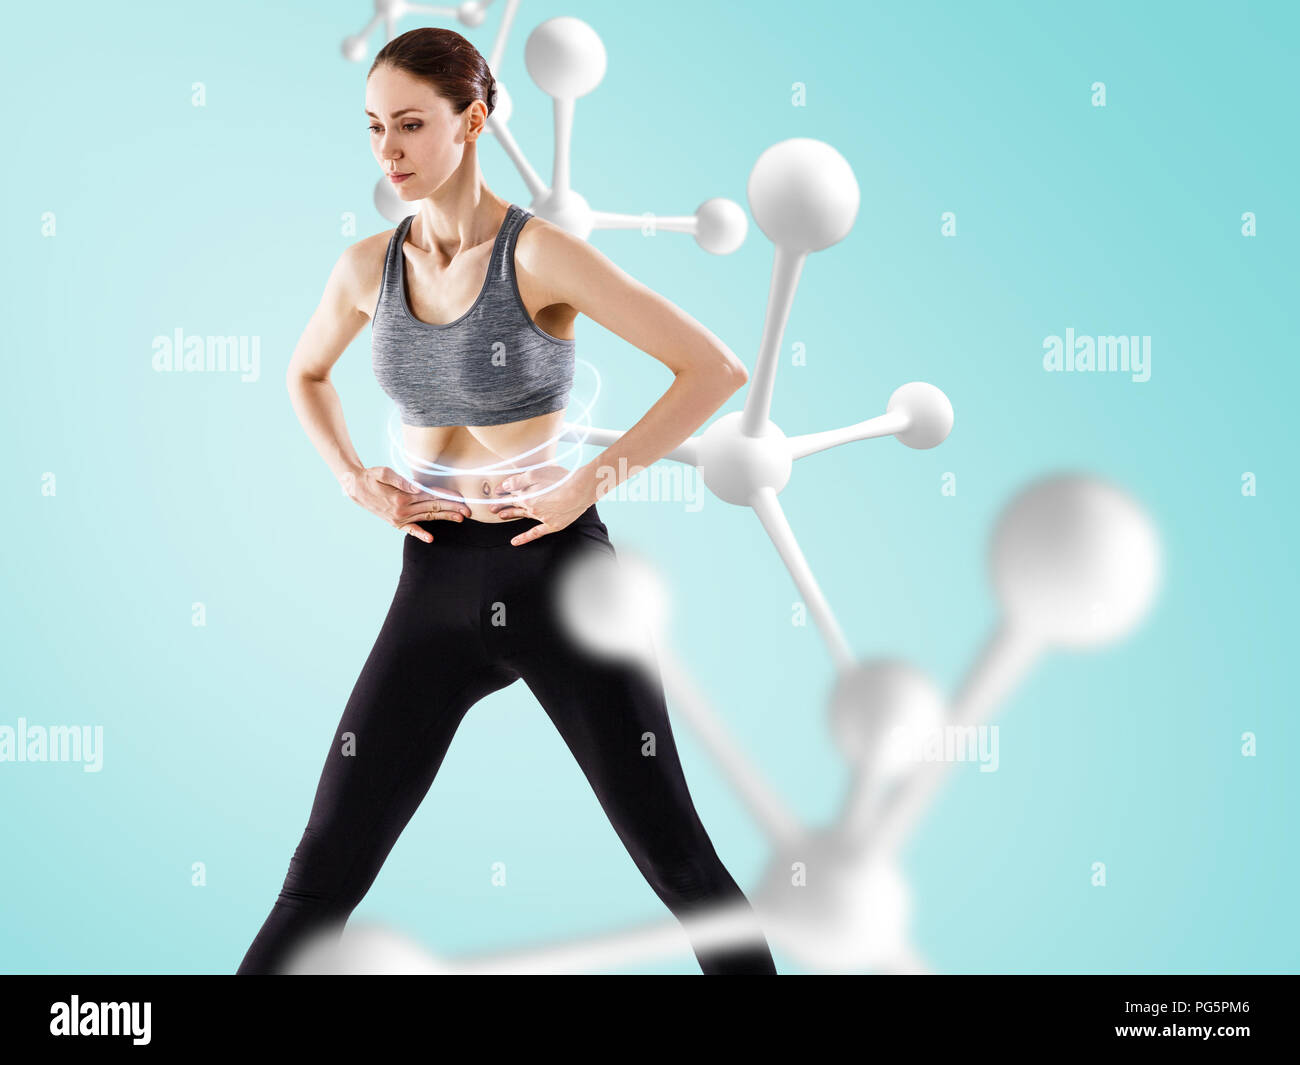 Young woman doing vacuum exercise near white molecule chain. Stock Photo